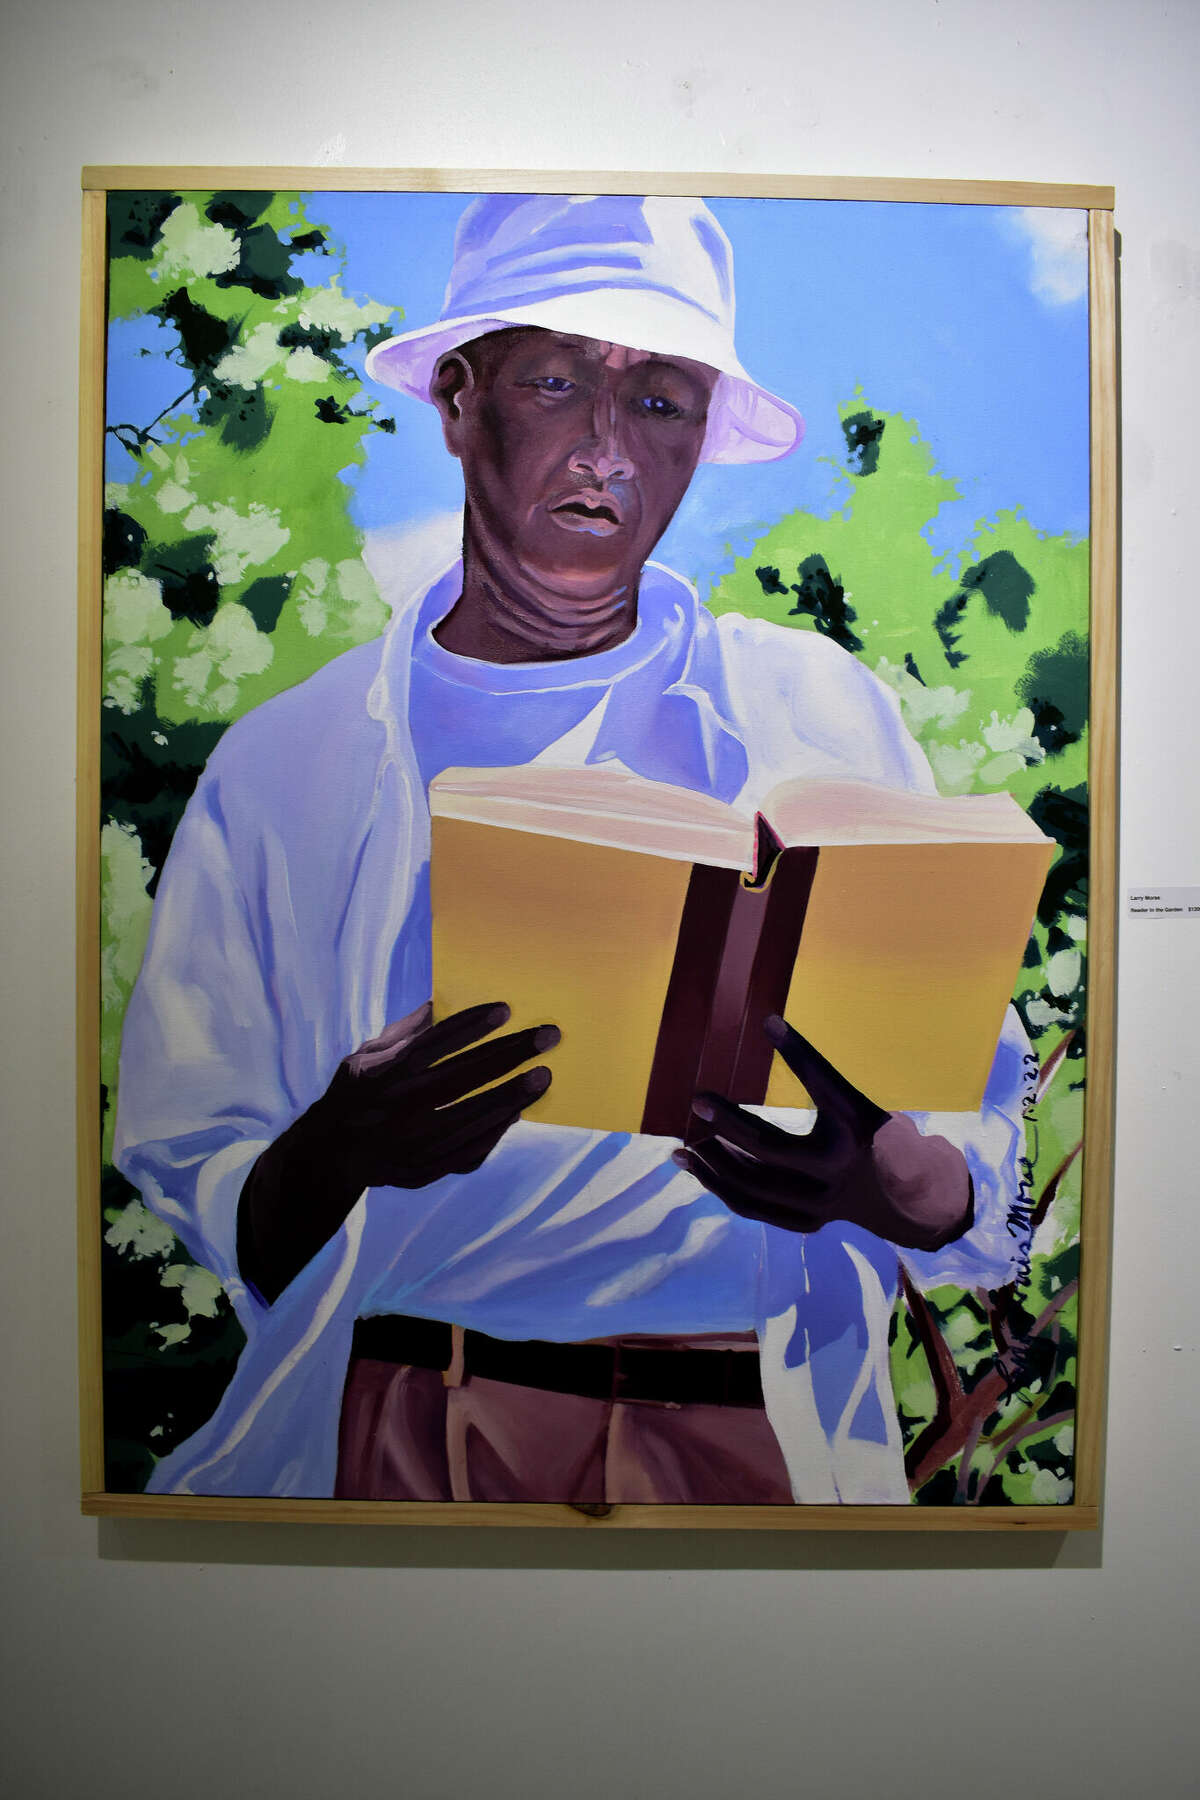 Larry Morse's paintings of the collection "Black Men Reading" presented at City Lights Gallery's "Absorption and Reflection" exhibit on Feb. 20, 2022. 